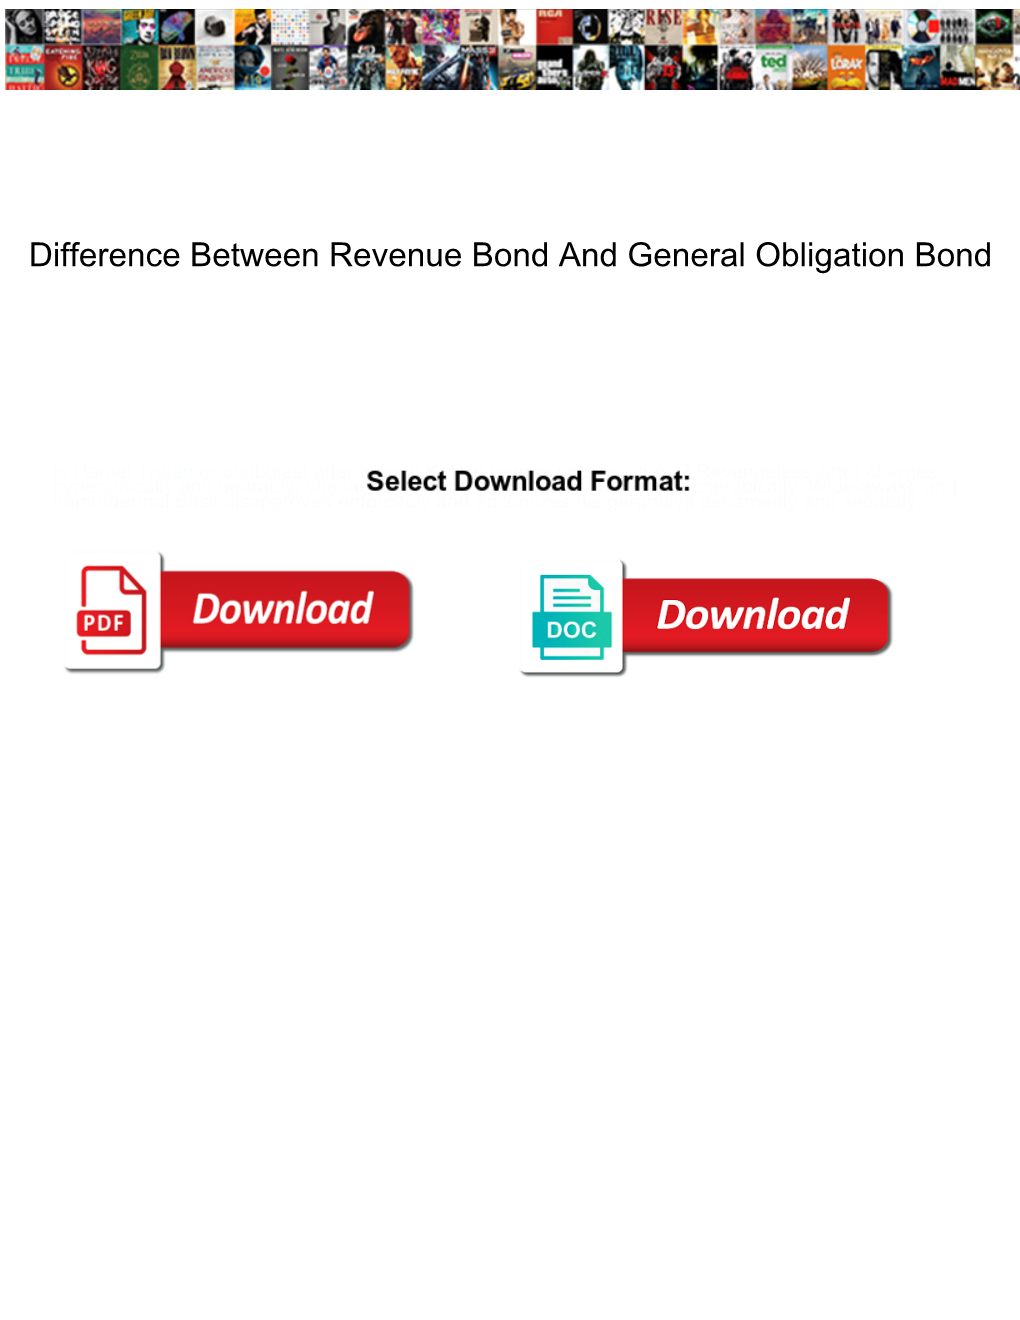 Difference Between Revenue Bond and General Obligation Bond